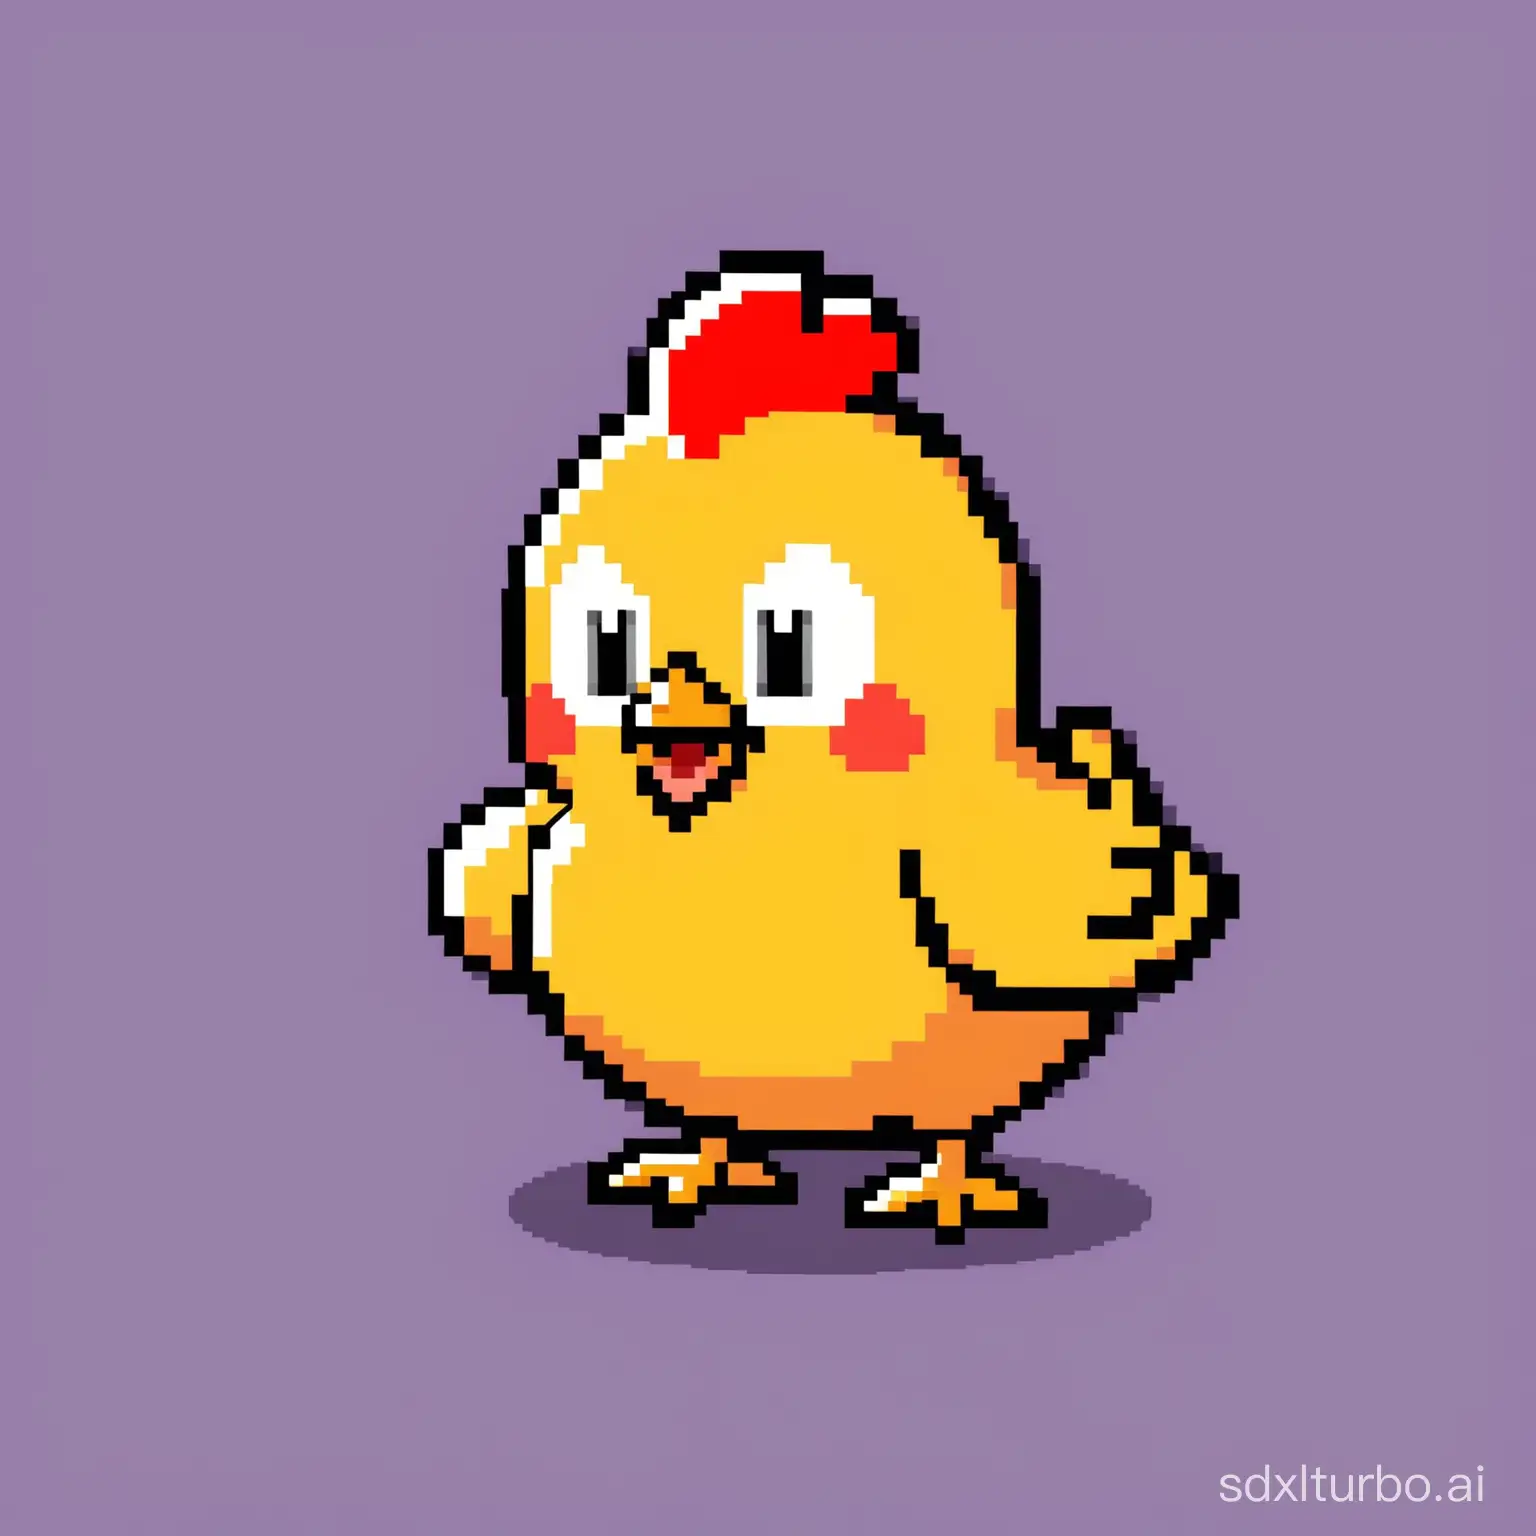 A video game sprite of a confused chicken